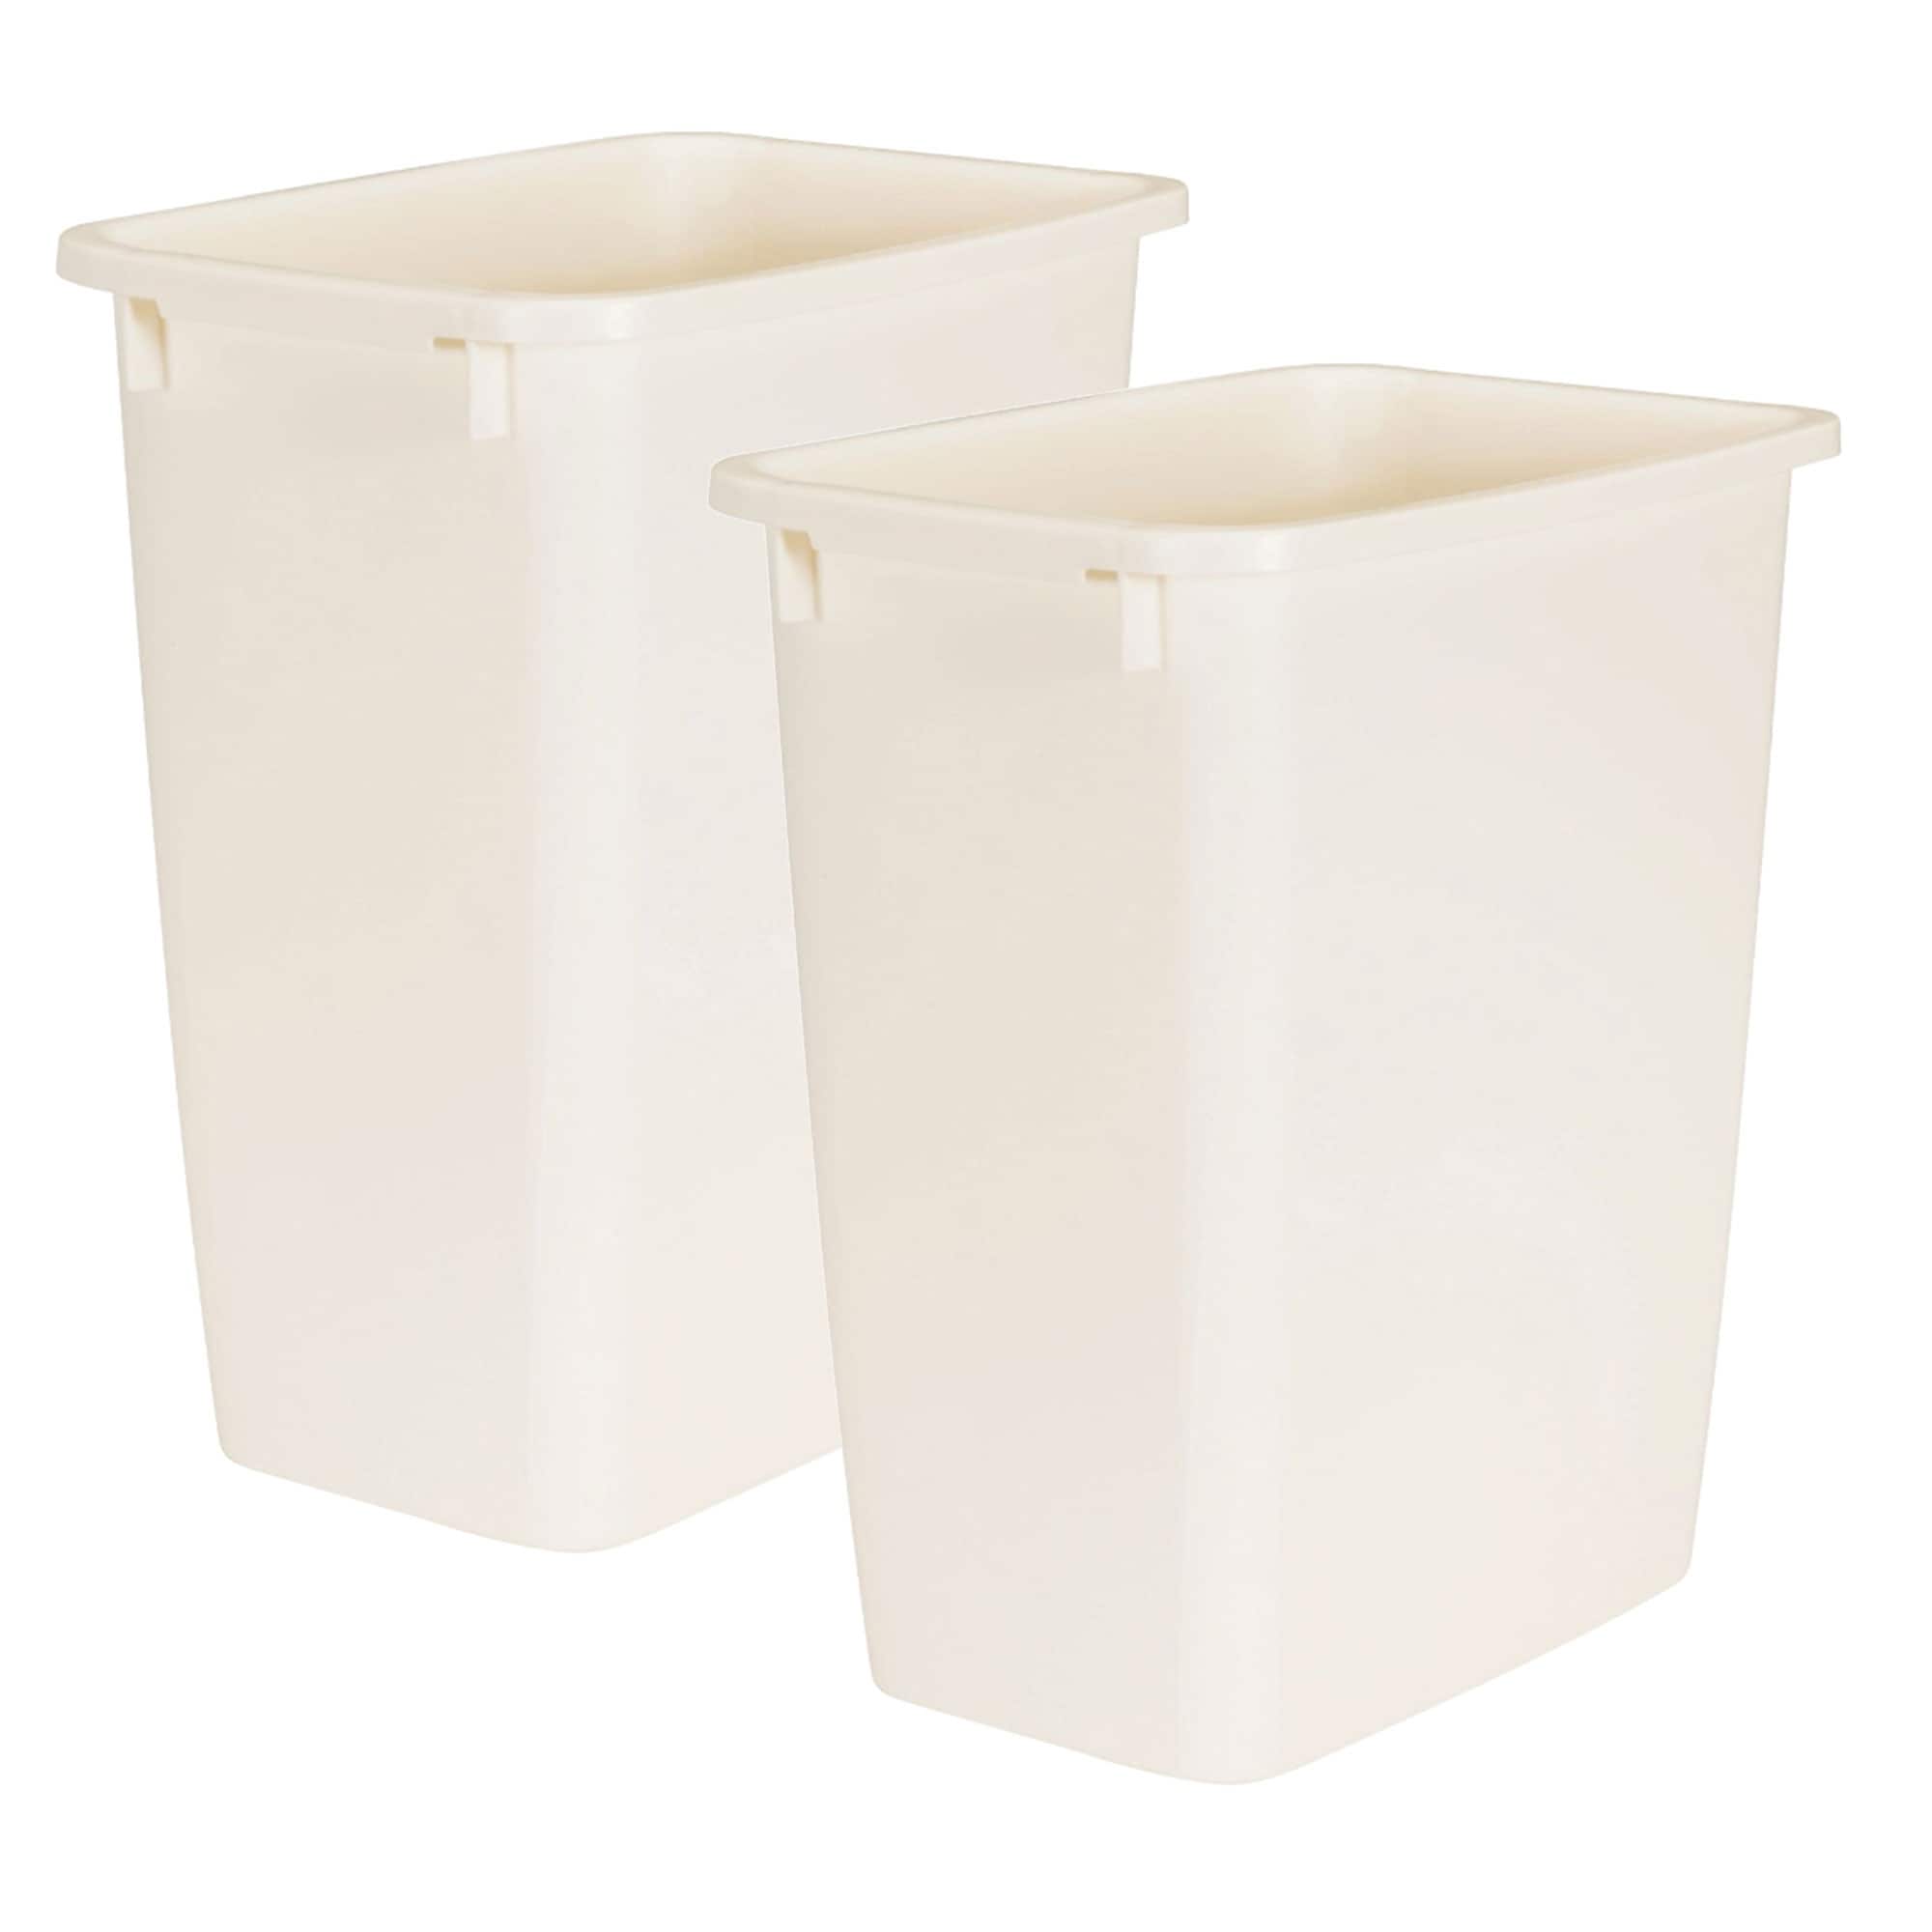 https://ak1.ostkcdn.com/images/products/is/images/direct/0444a50c5ef09e44fb8381bc5a83dcc787b8a7a9/Rubbermaid-21-Quart-Rectangular-Kitchen-Wastebasket-Trash-Can%2C-Bisque-%282-Pack%29.jpg